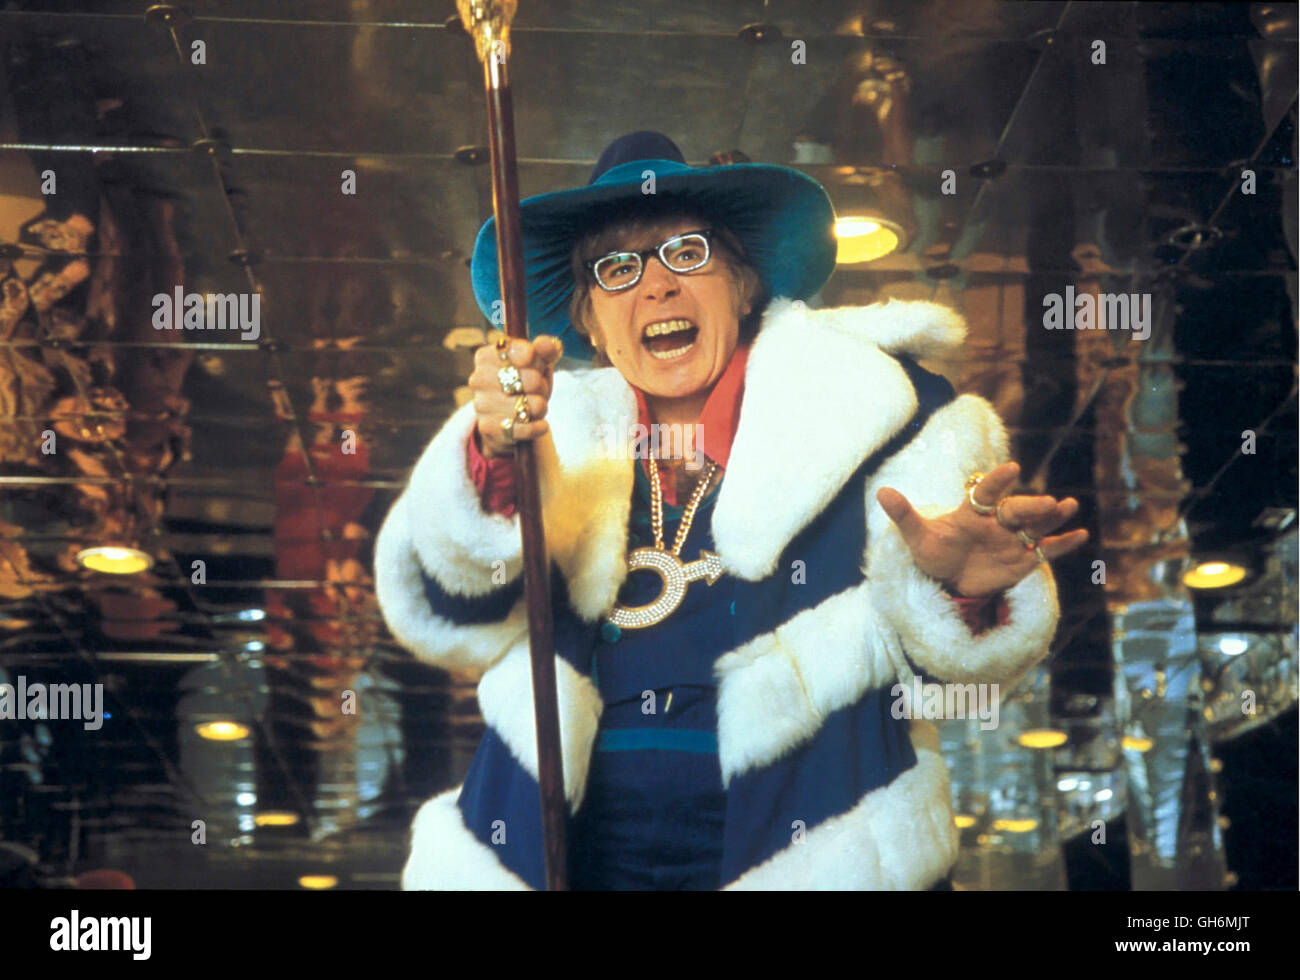 AUSTIN POWERS IN GOLDSTÄNDER / Austin Powers in Goldmember USA 2002 / Jay Roach Austin Powers (MIKE MYERS) Regie: Jay Roach aka. Austin Powers in Goldmember Stock Photo